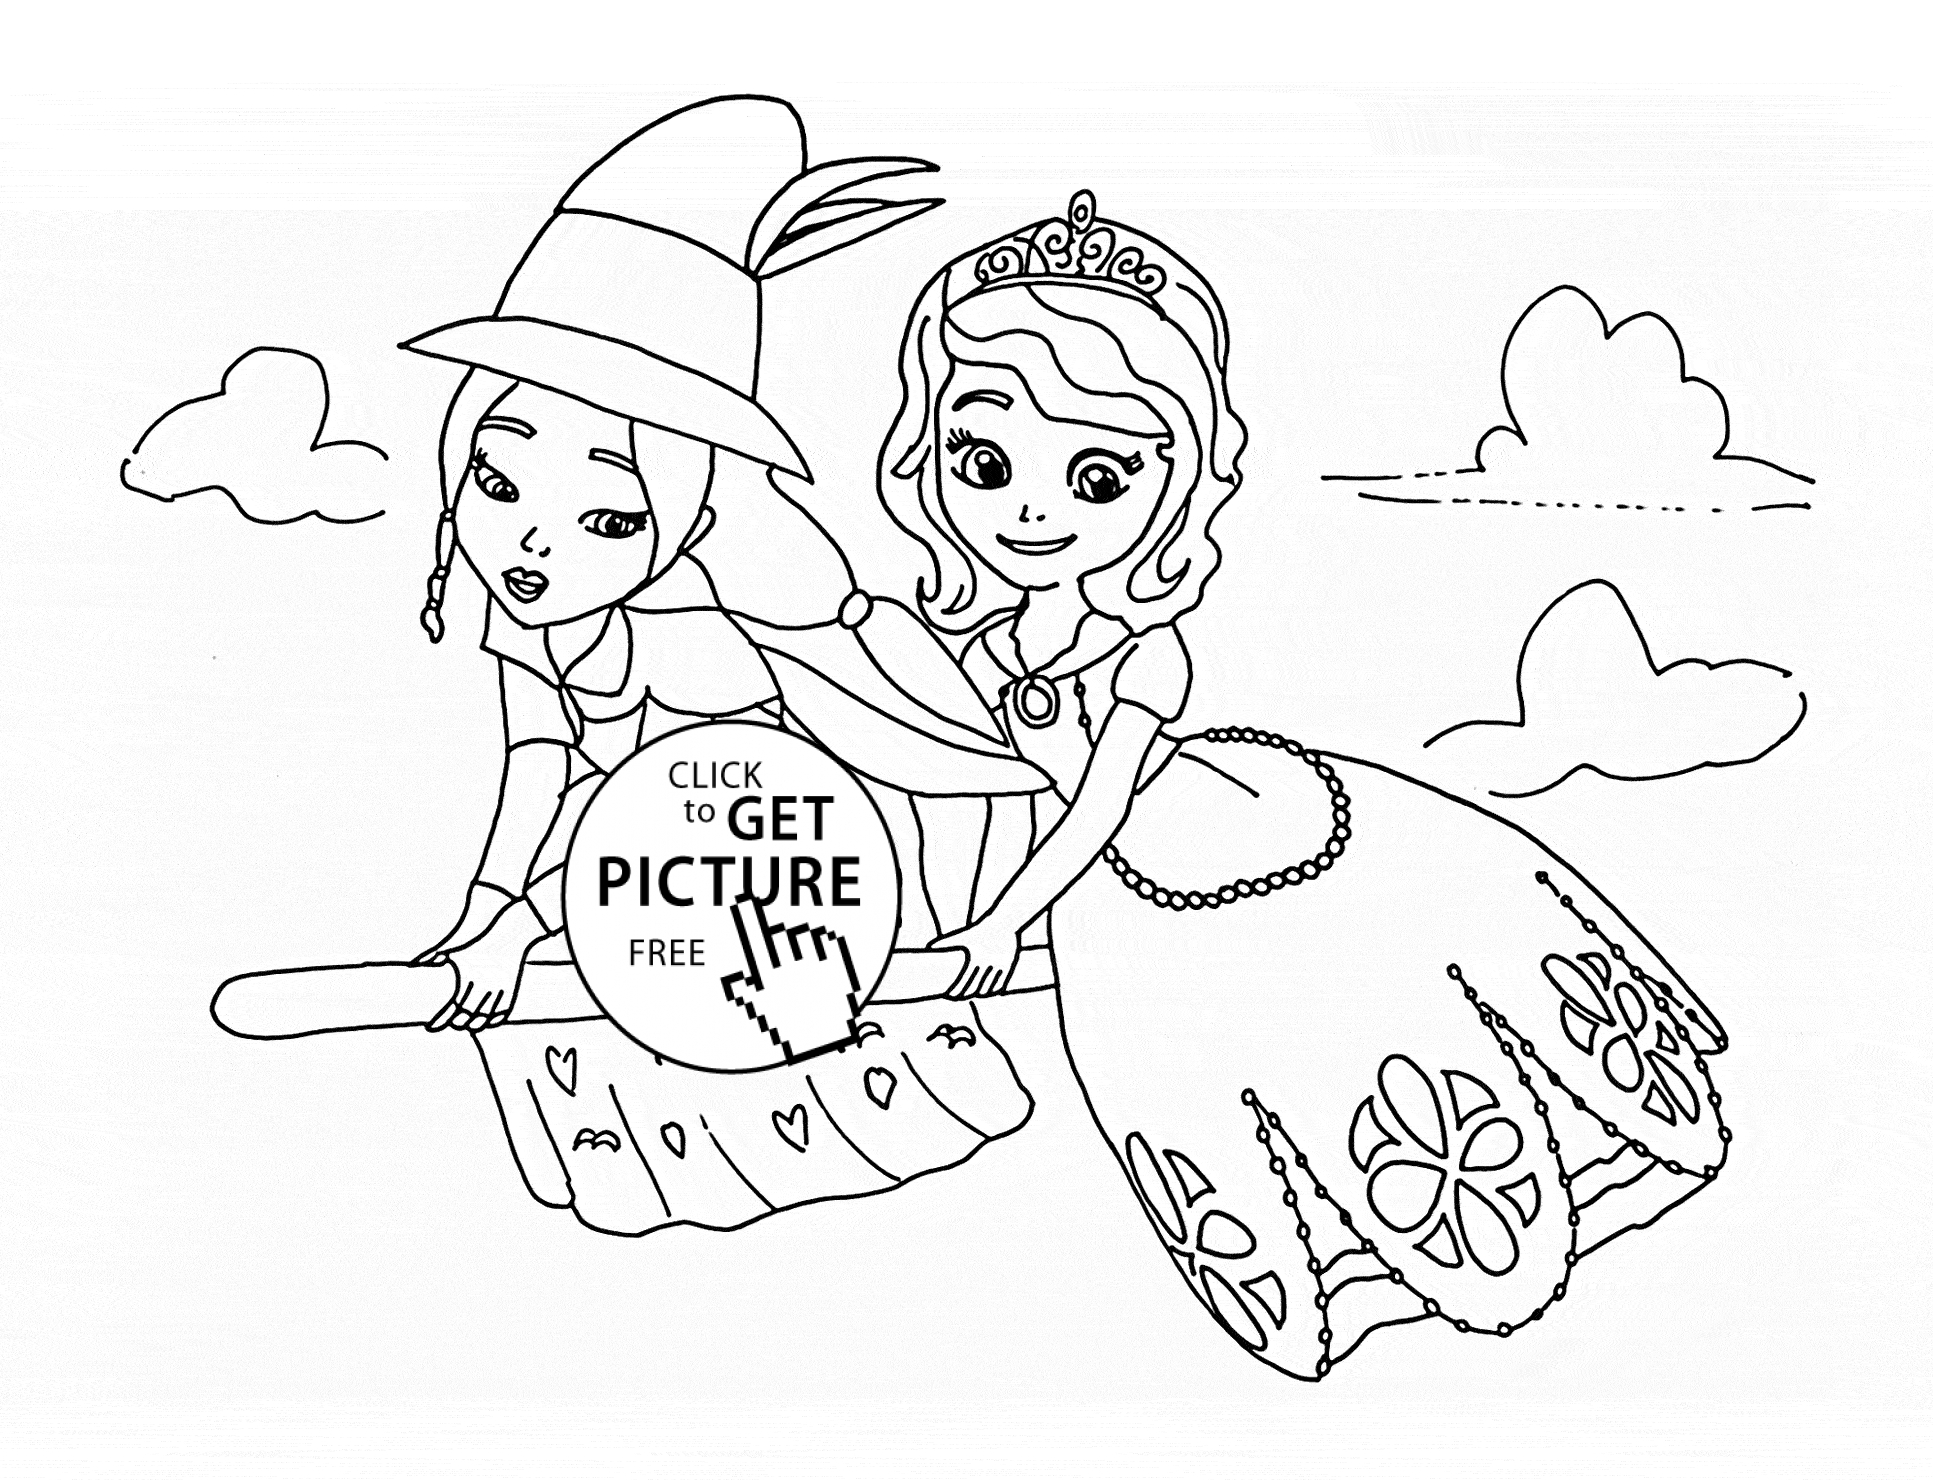 sophie the first coloring pages sofia the first coloring pages queen miranda sofia the first sophie coloring pages the 